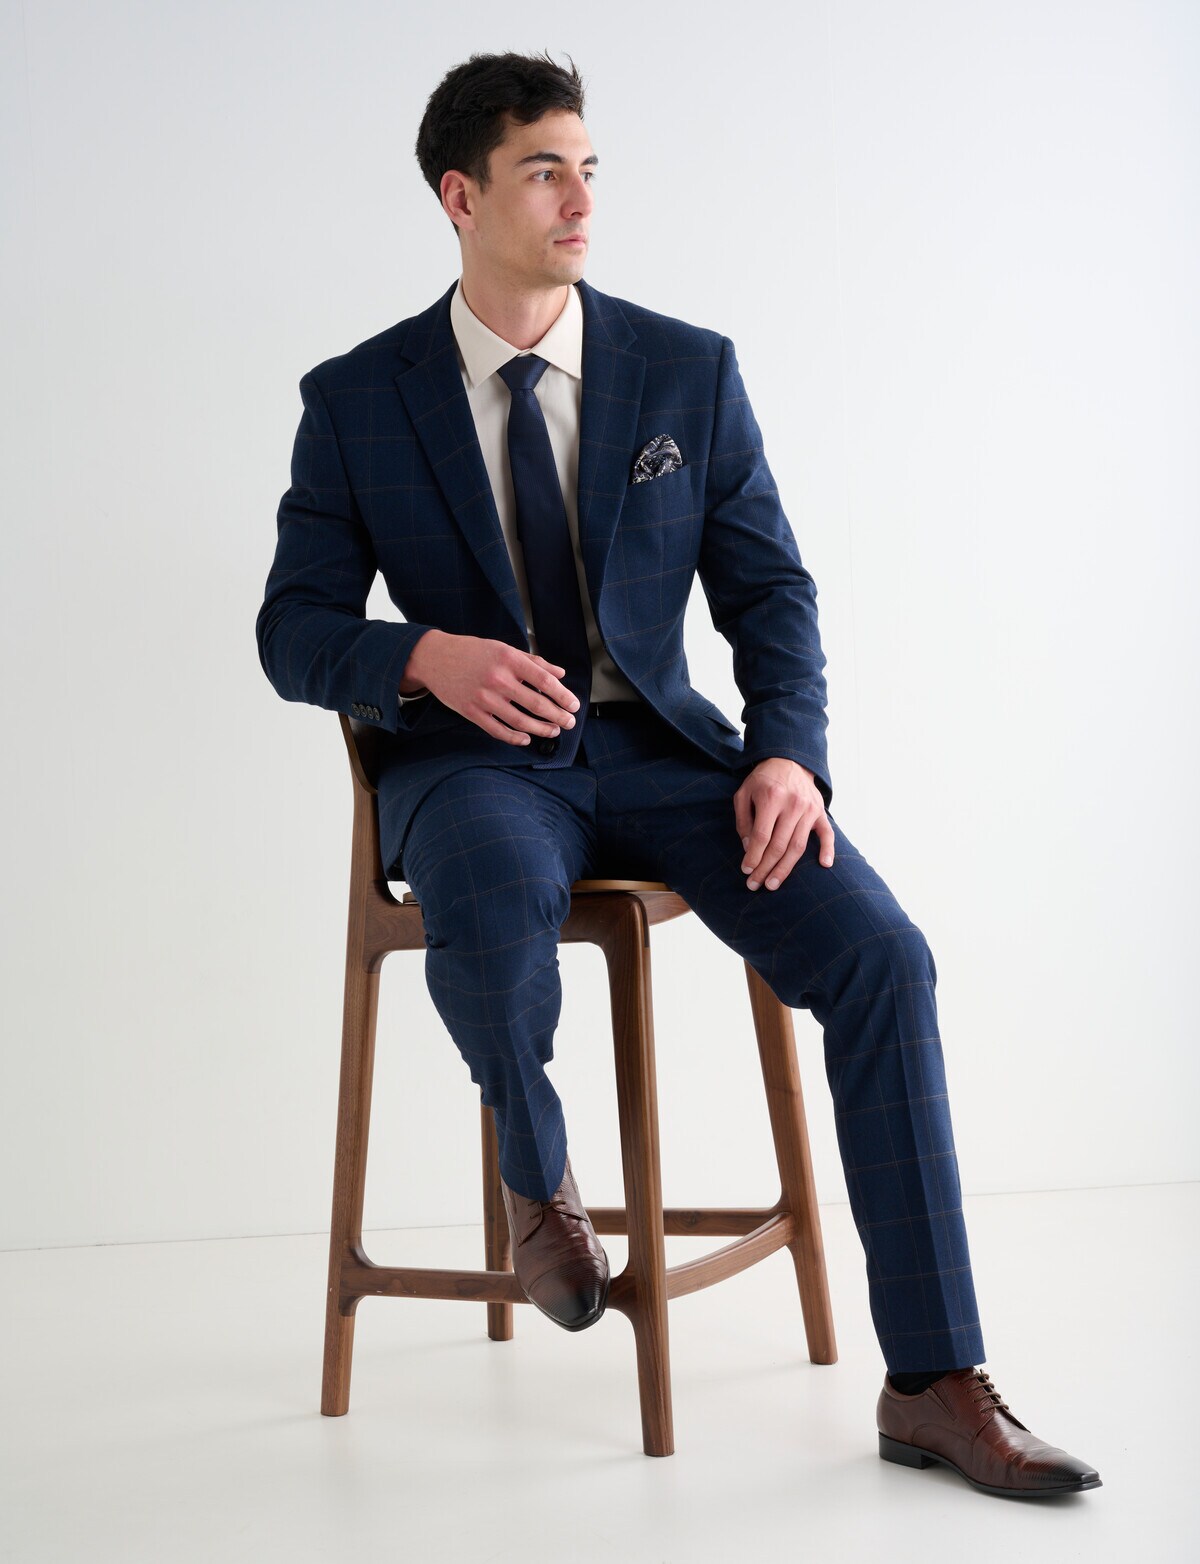 Laidlaw + Leeds Tailored Check Jacket, Navy & Tan - Suit Jackets & Pants